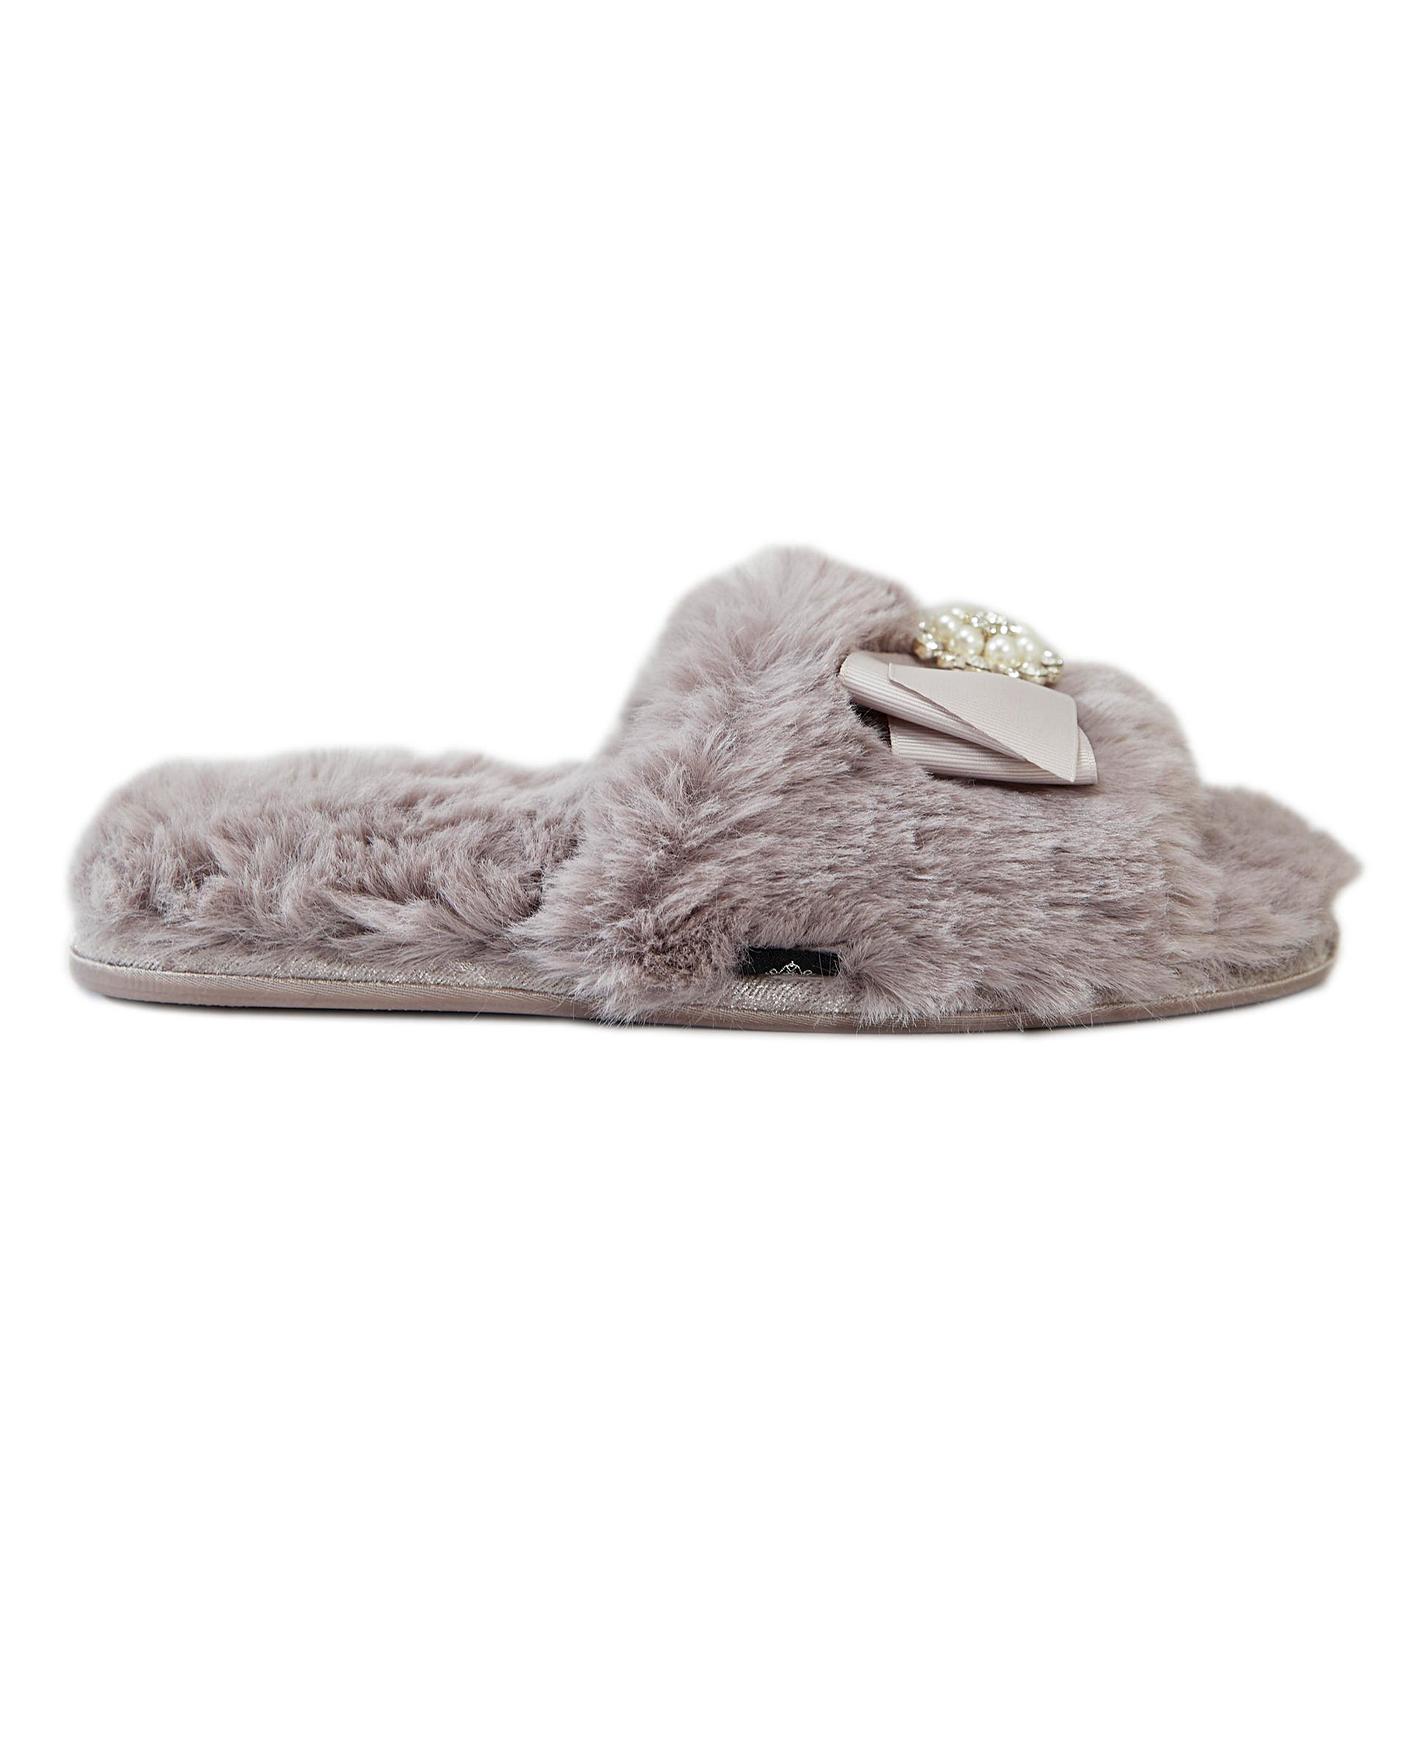 pretty slippers for adults